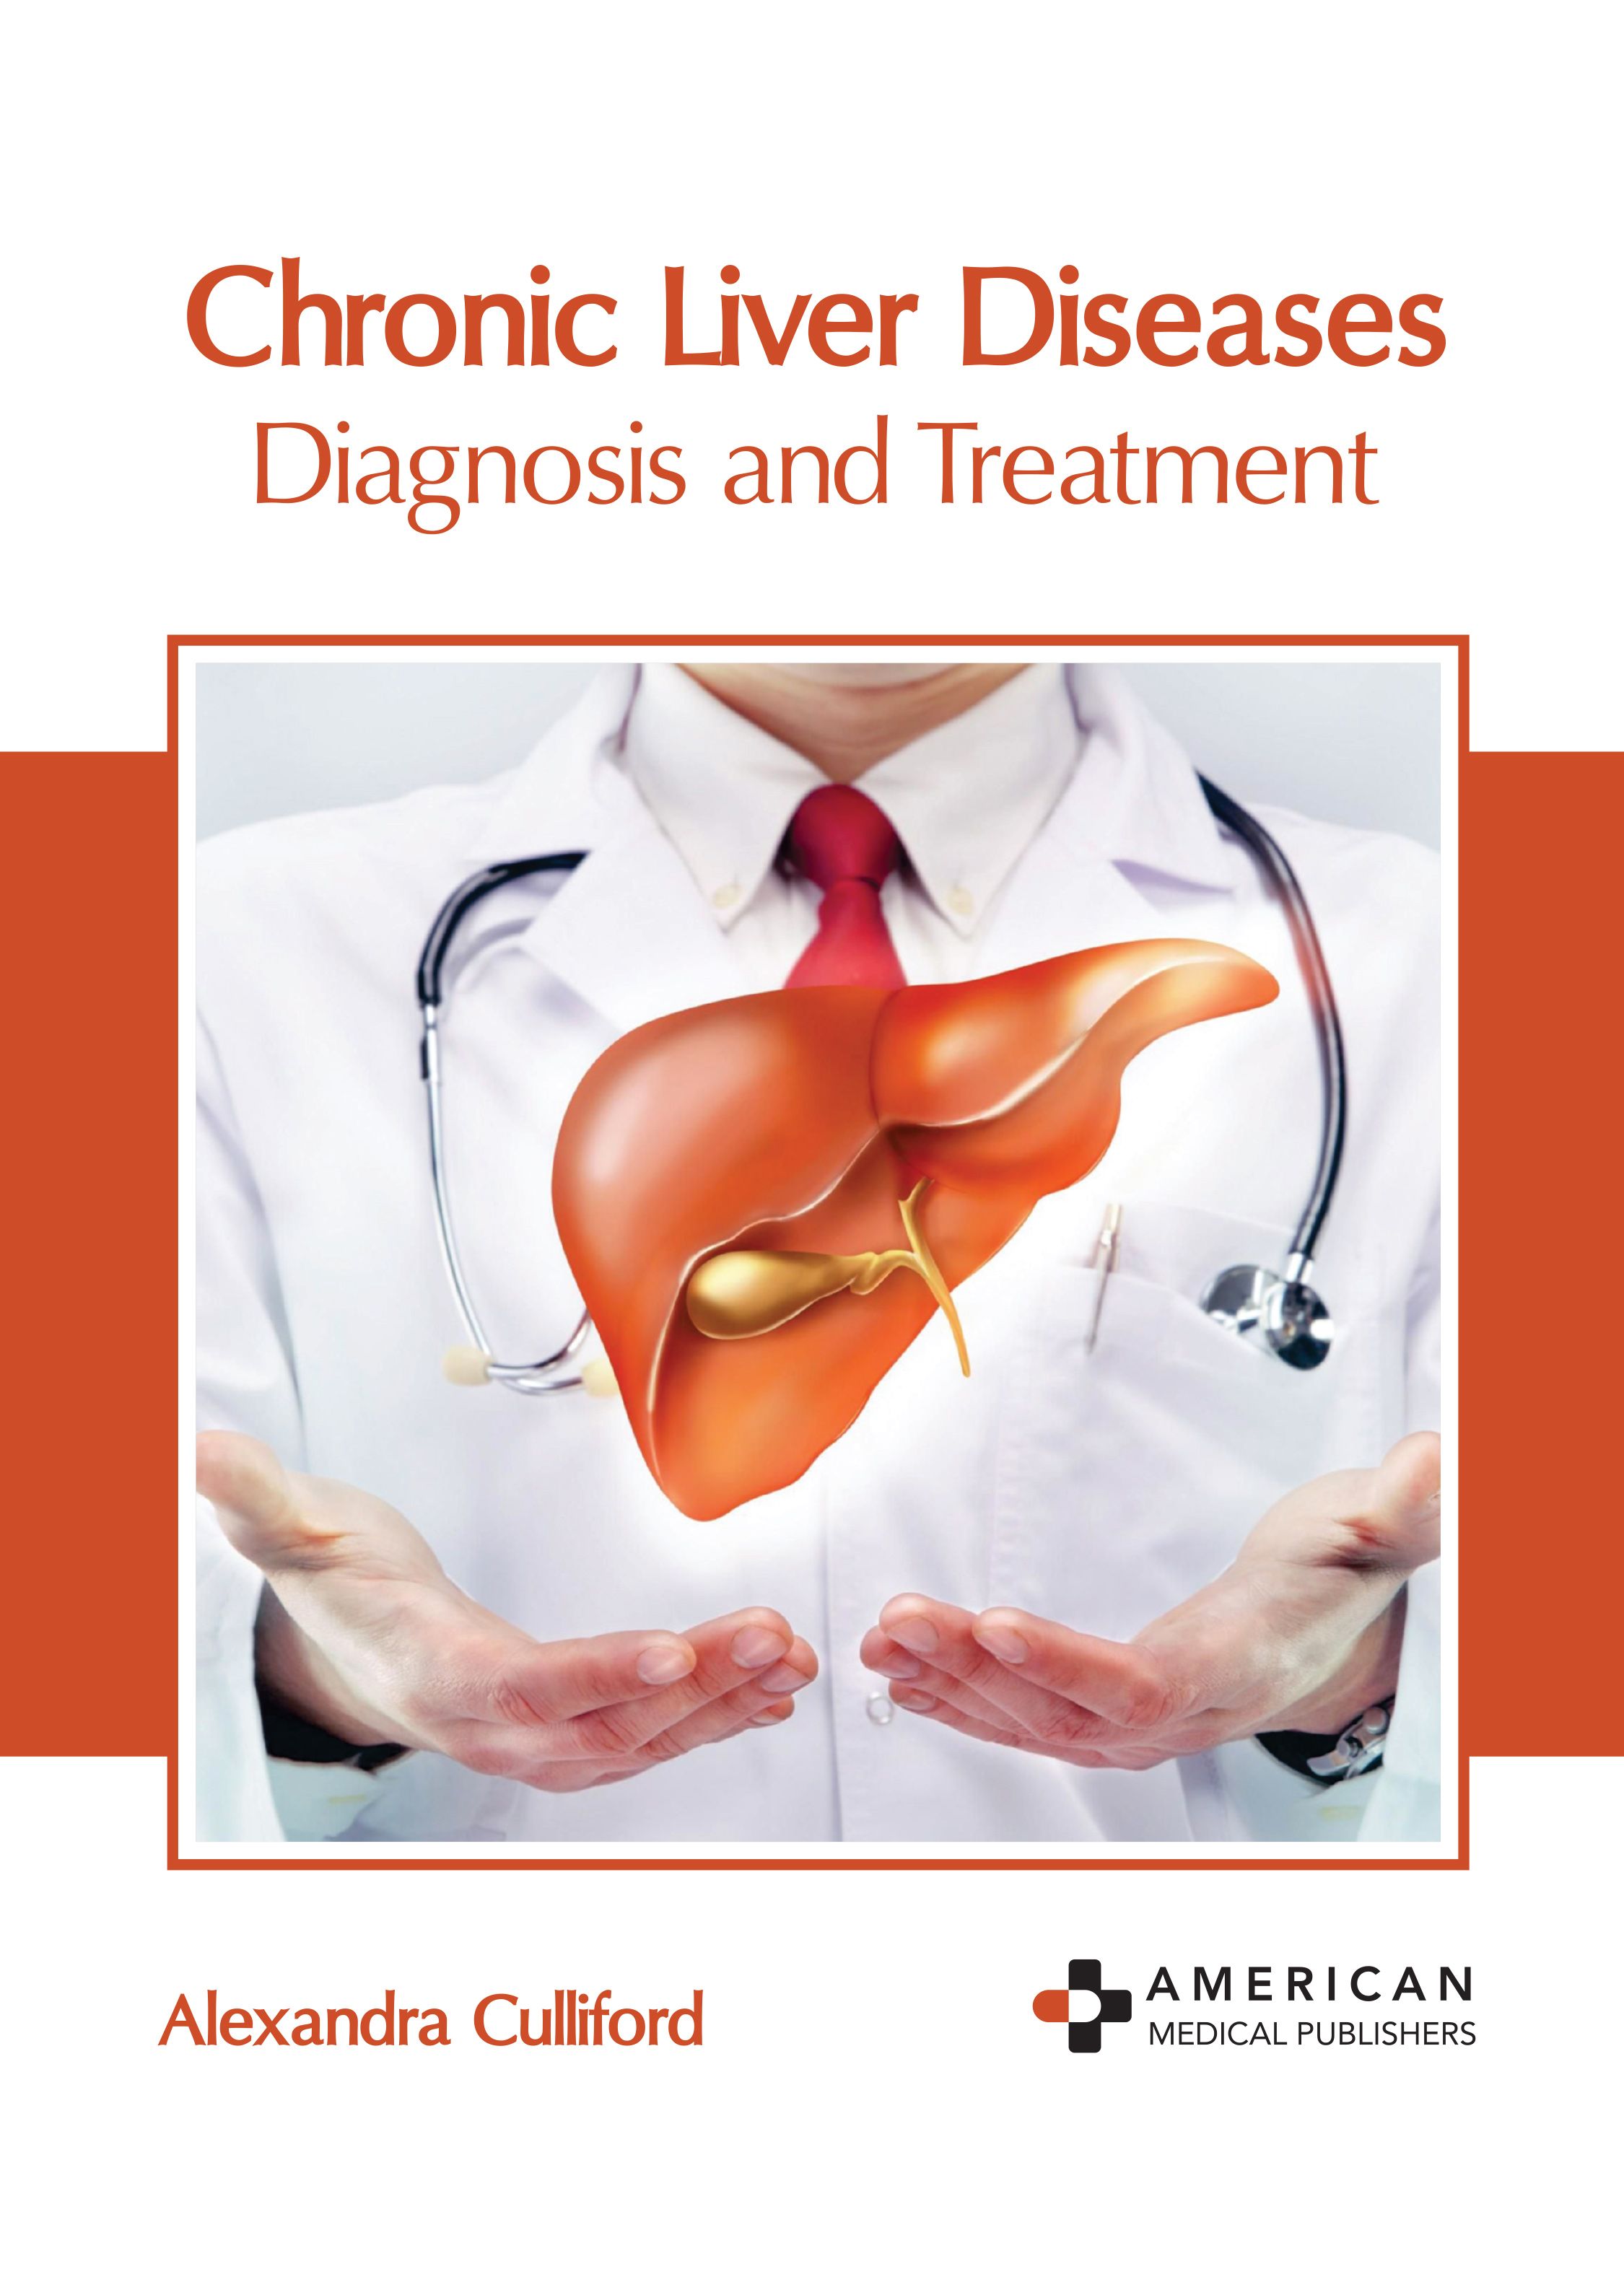 CHRONIC LIVER DISEASES: DIAGNOSIS AND TREATMENT